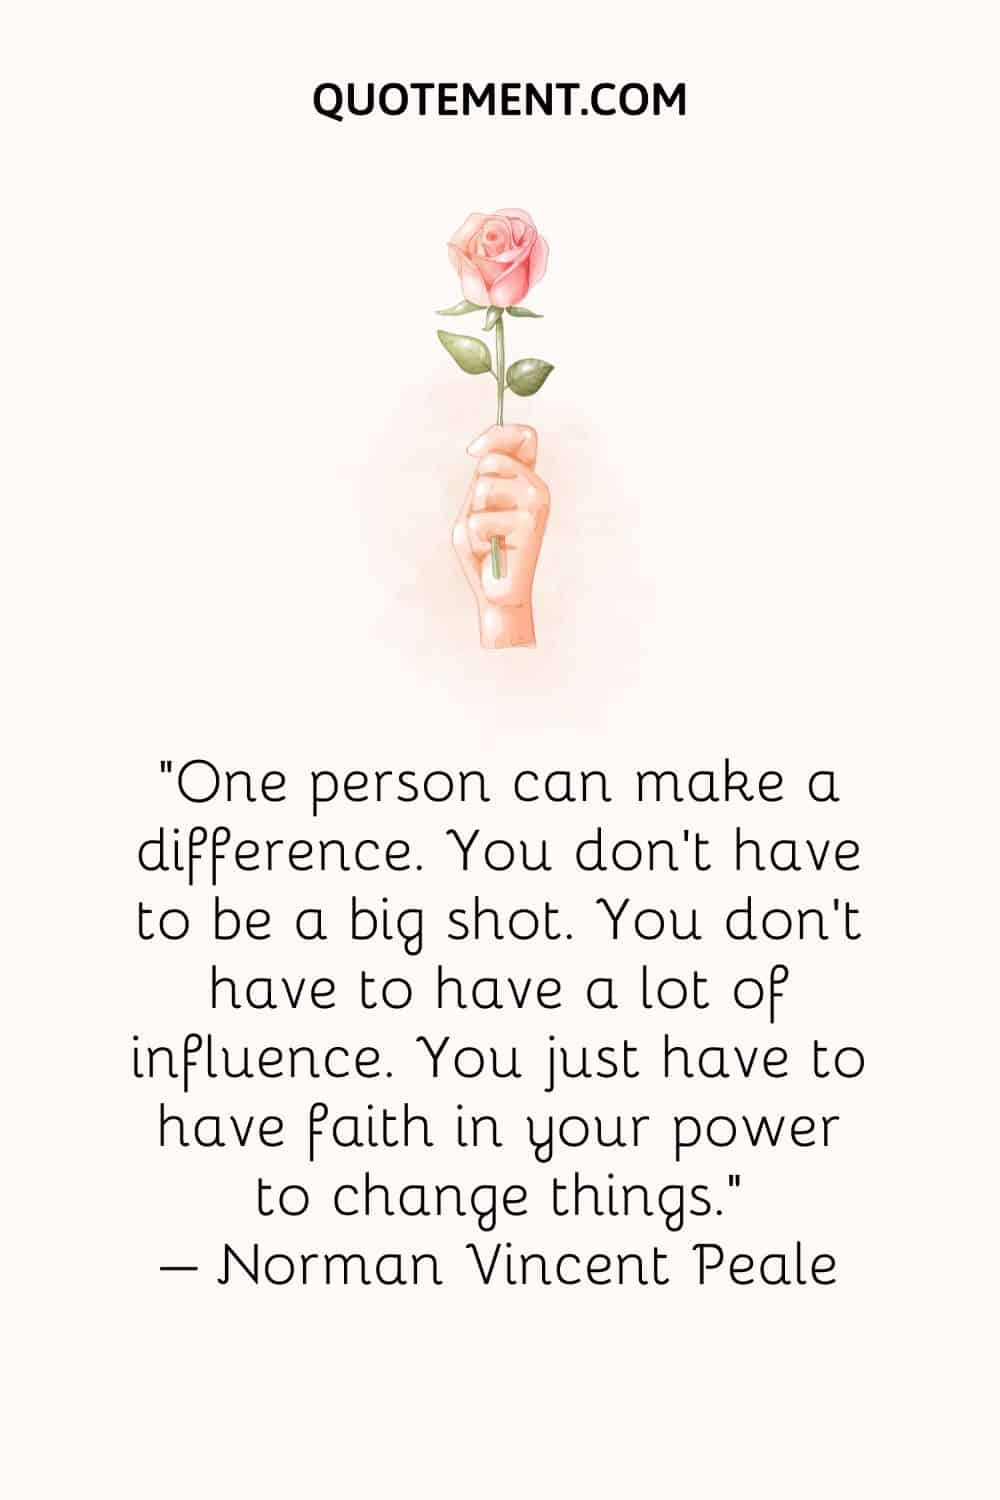 One person can make a difference. You don't have to be a big shot